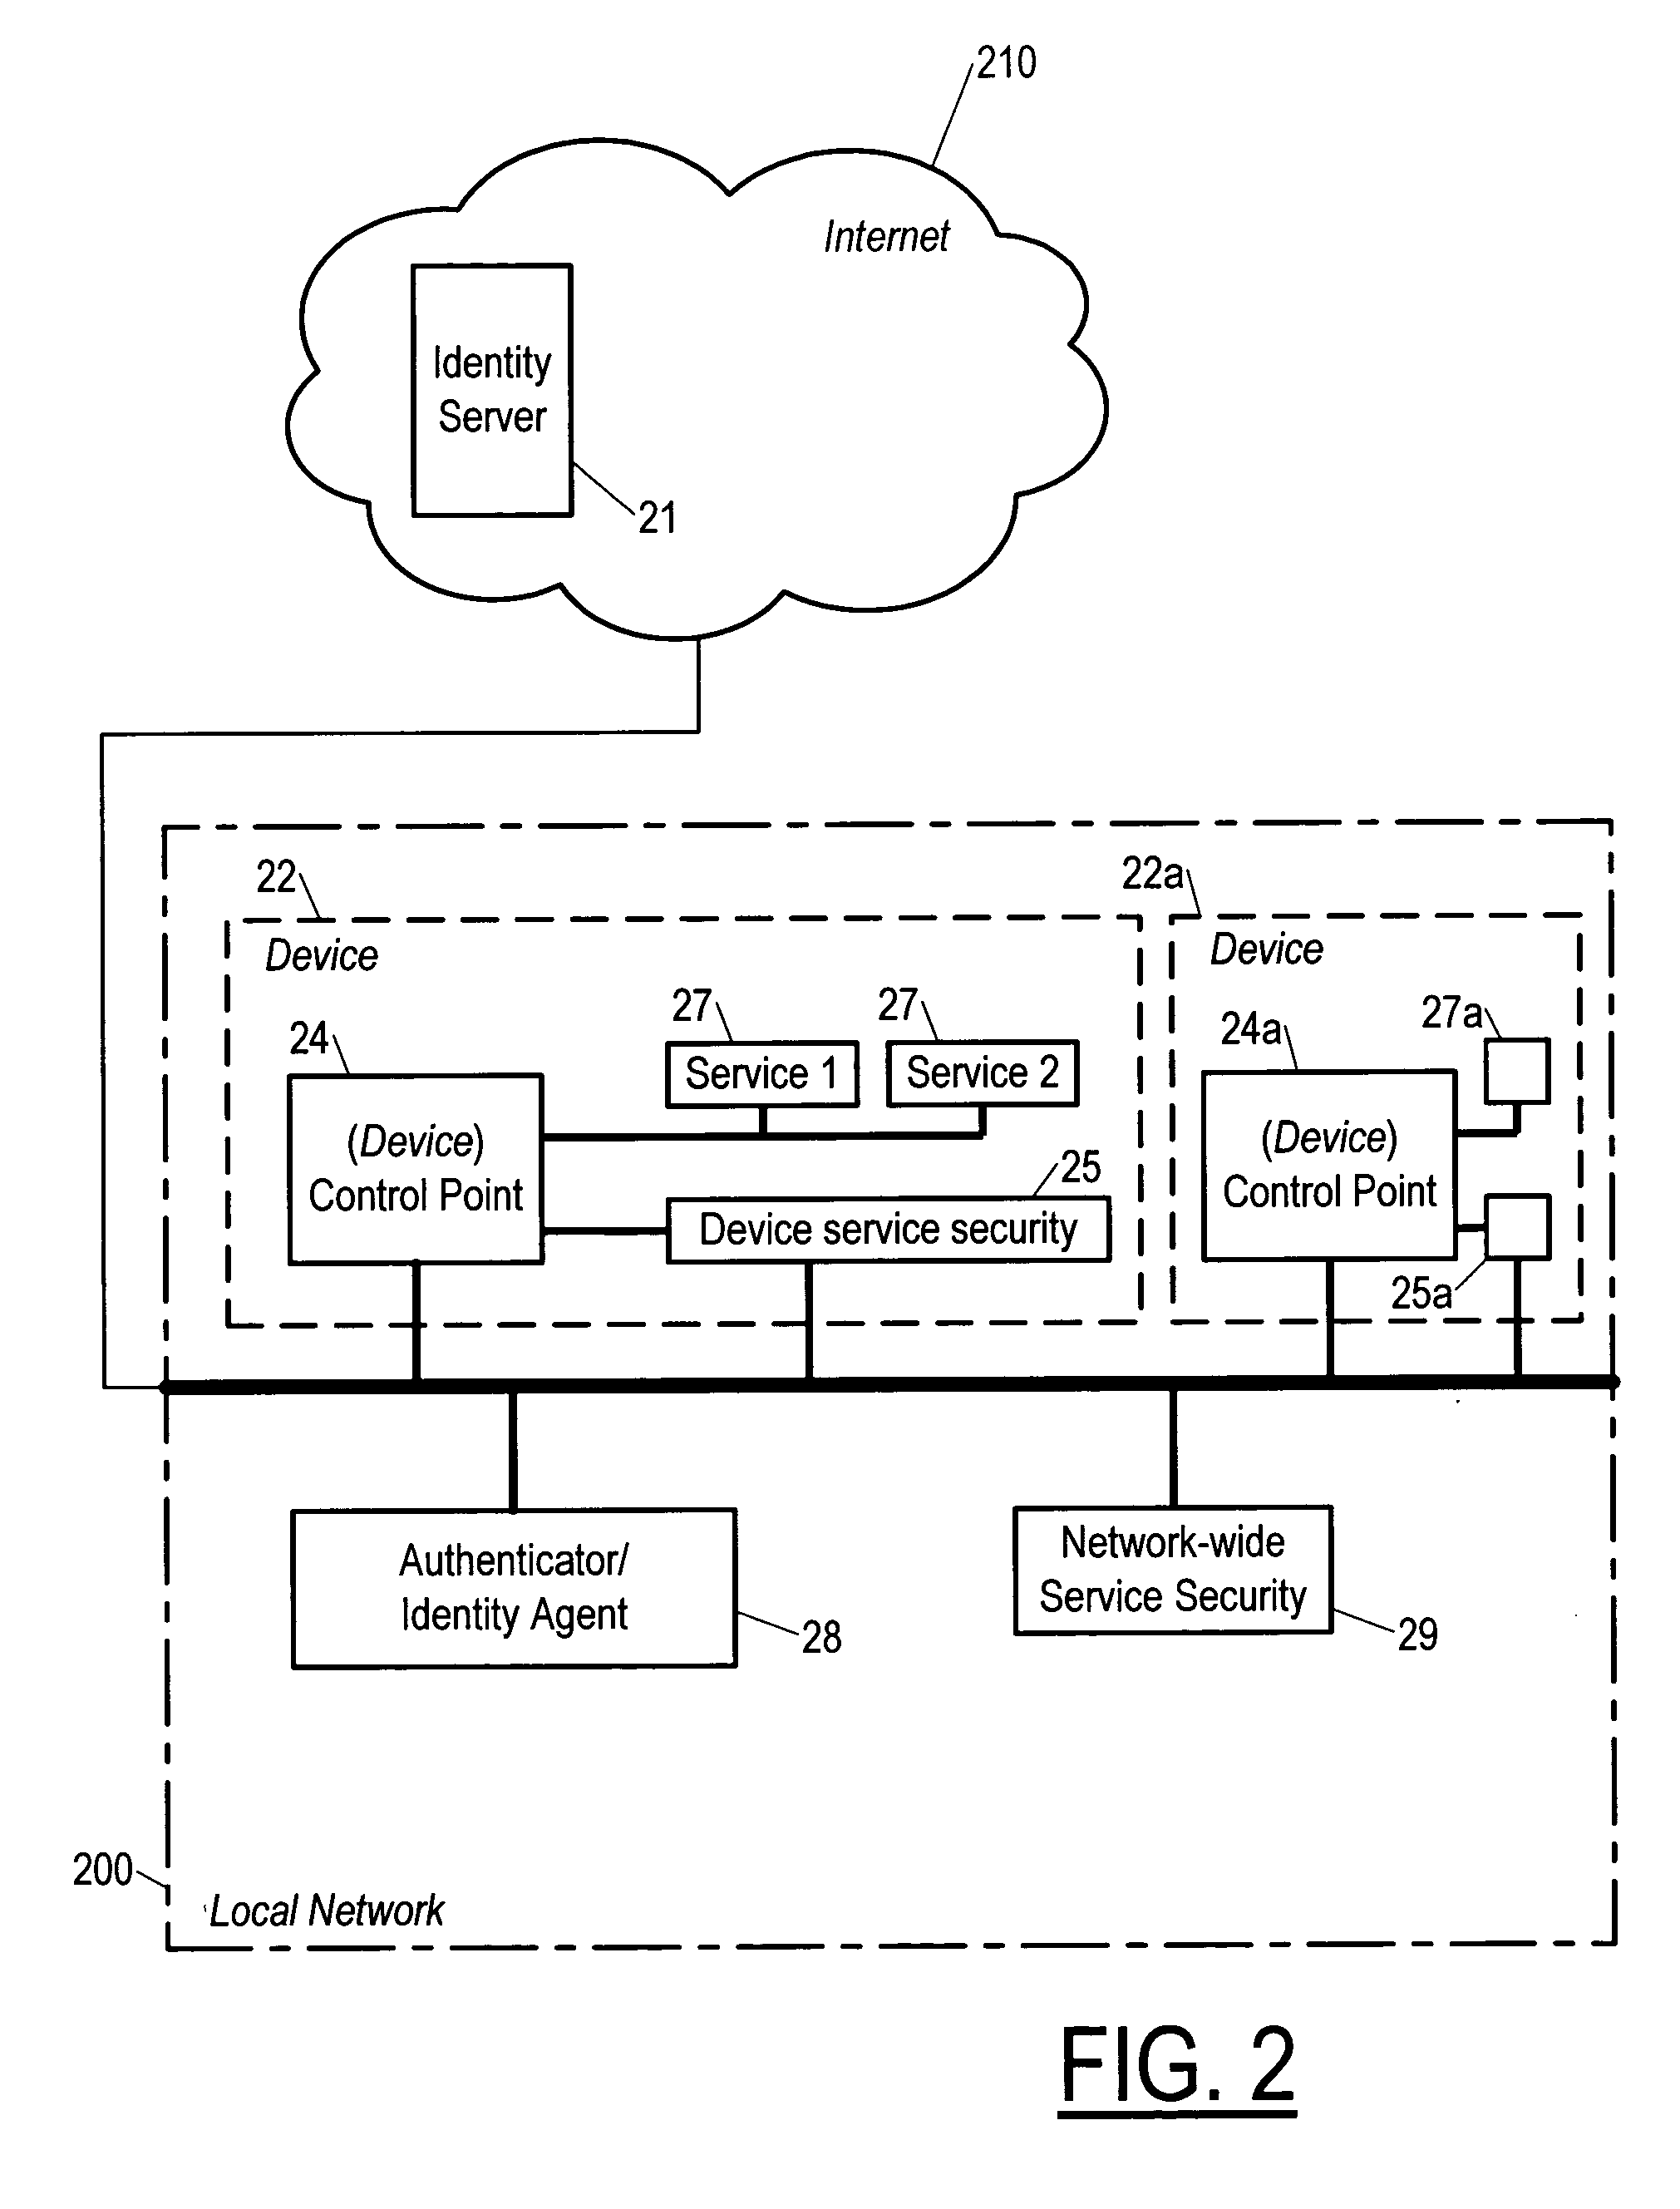 Method and apparatus for a security framework that enables identity and access control services